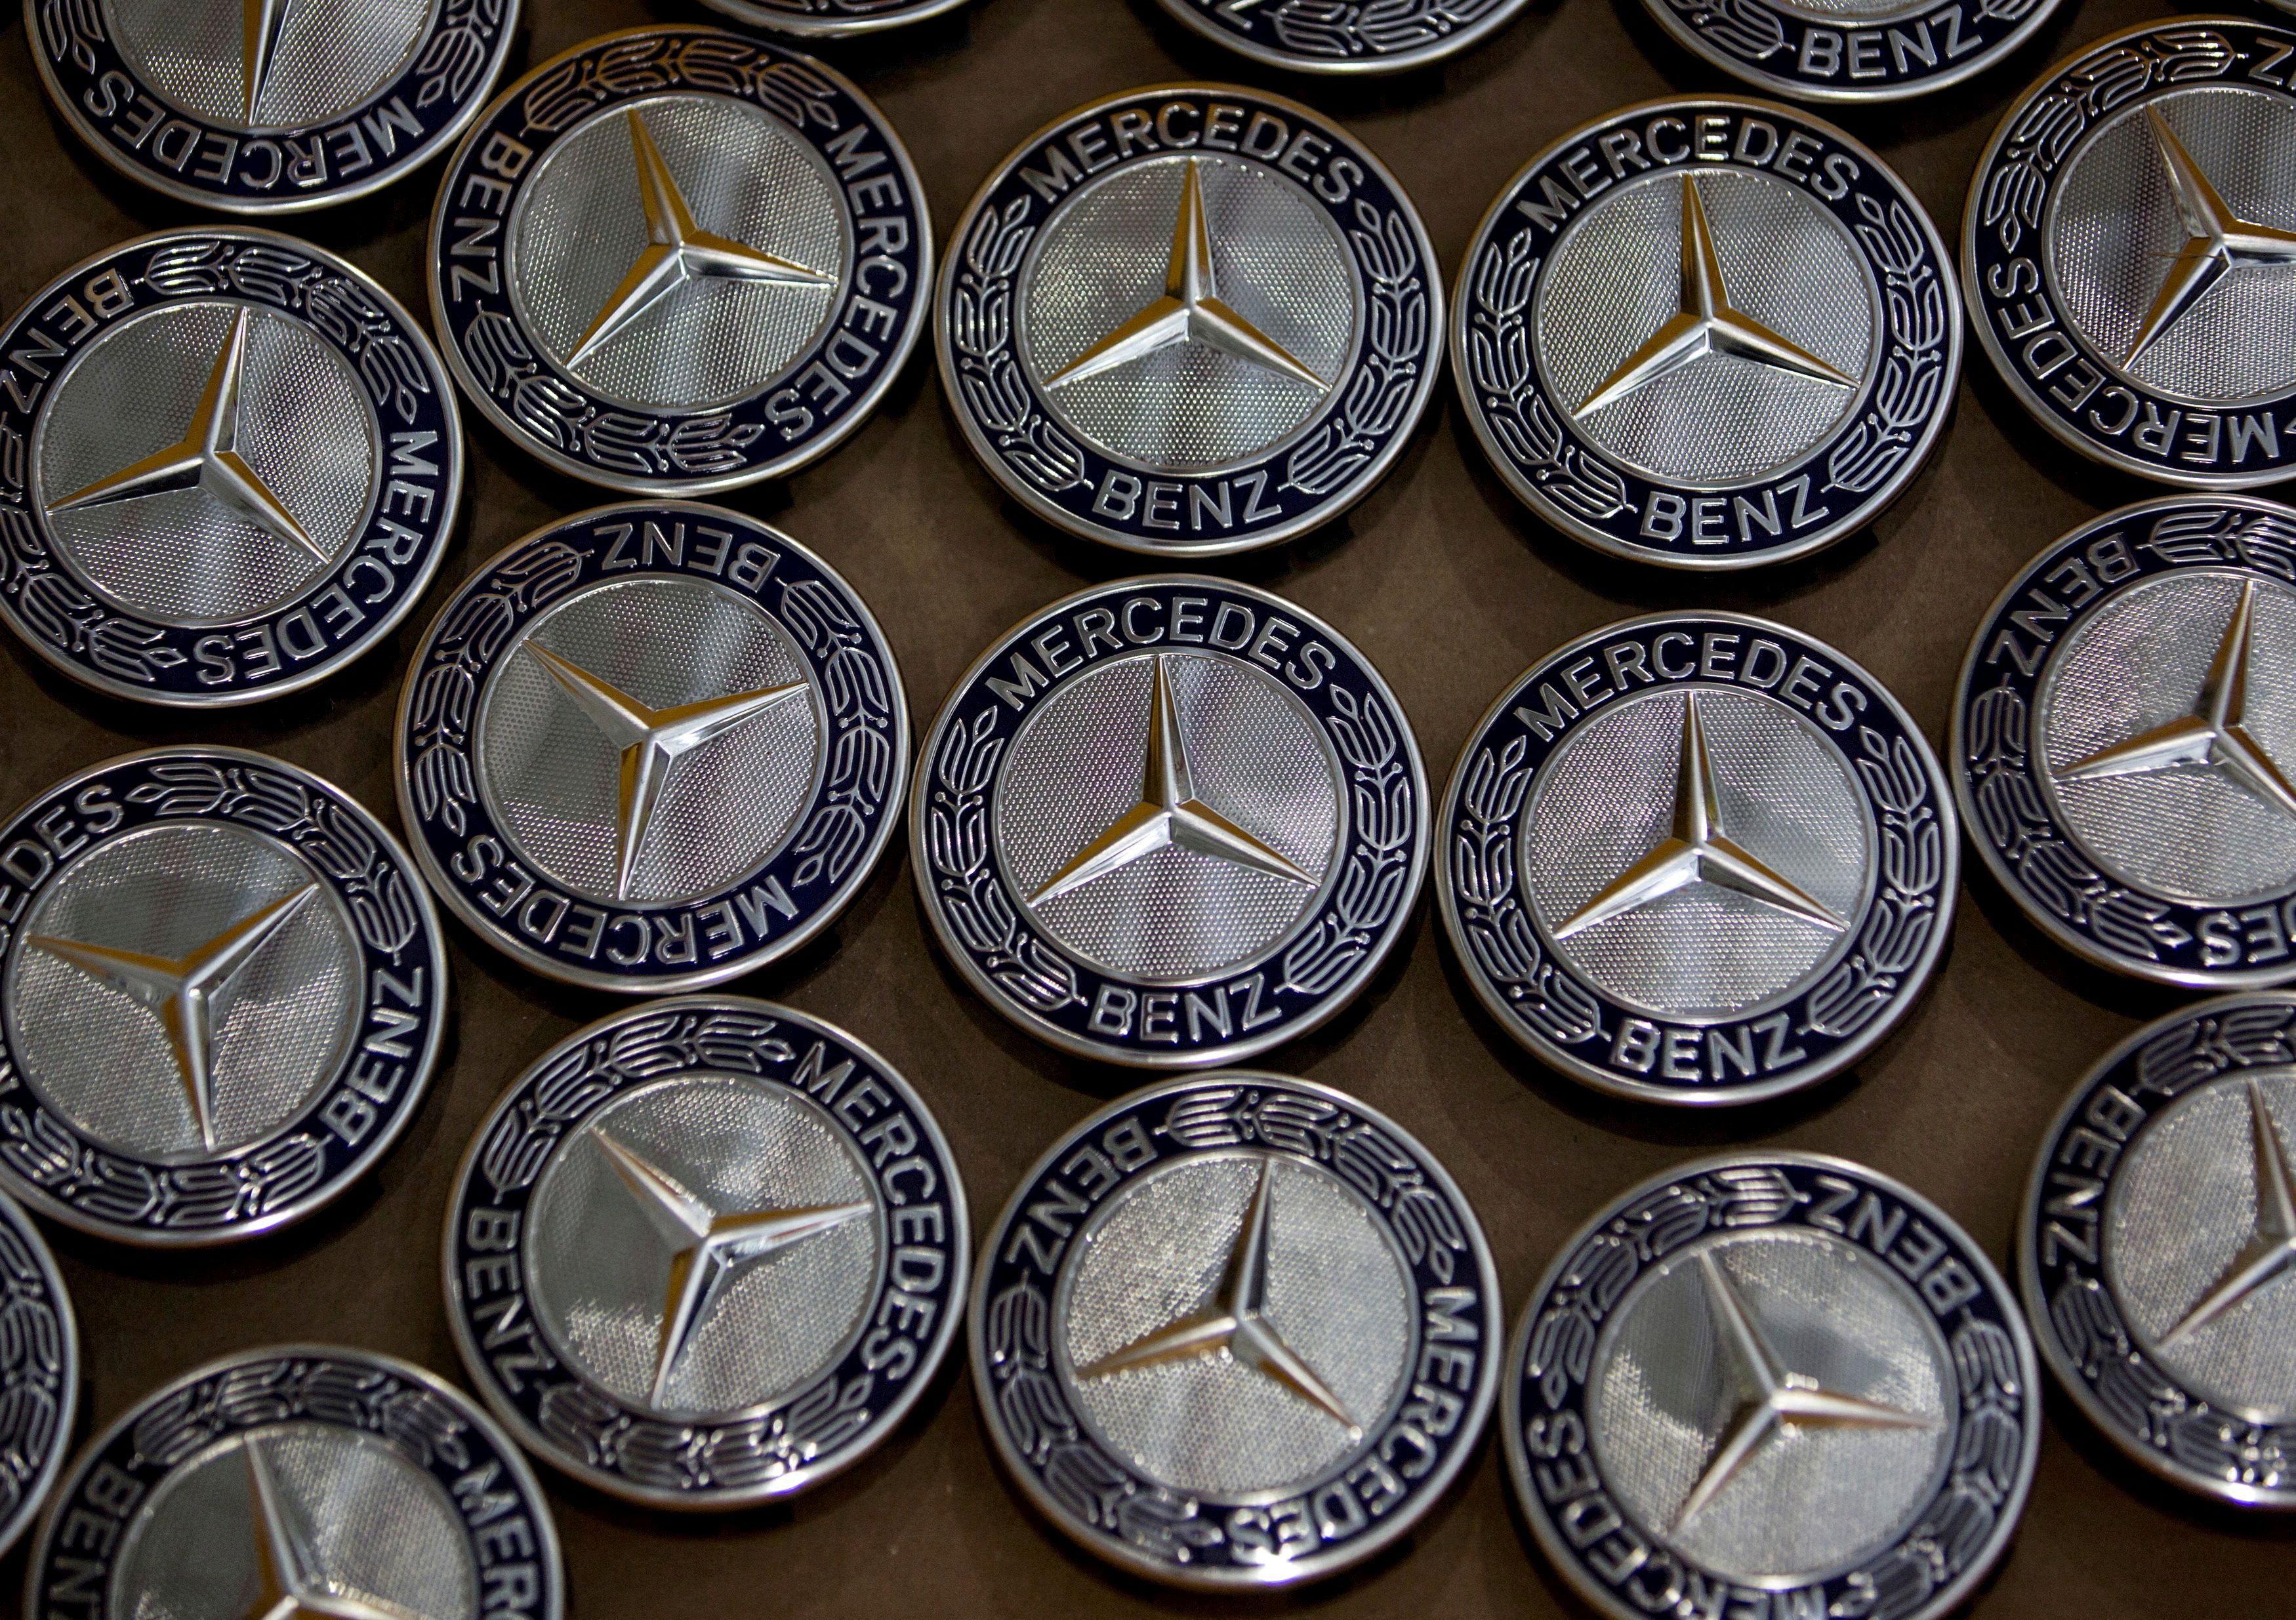 Mercedes-Benz logos are seen at the company's vehicle assembly plant in Chakan